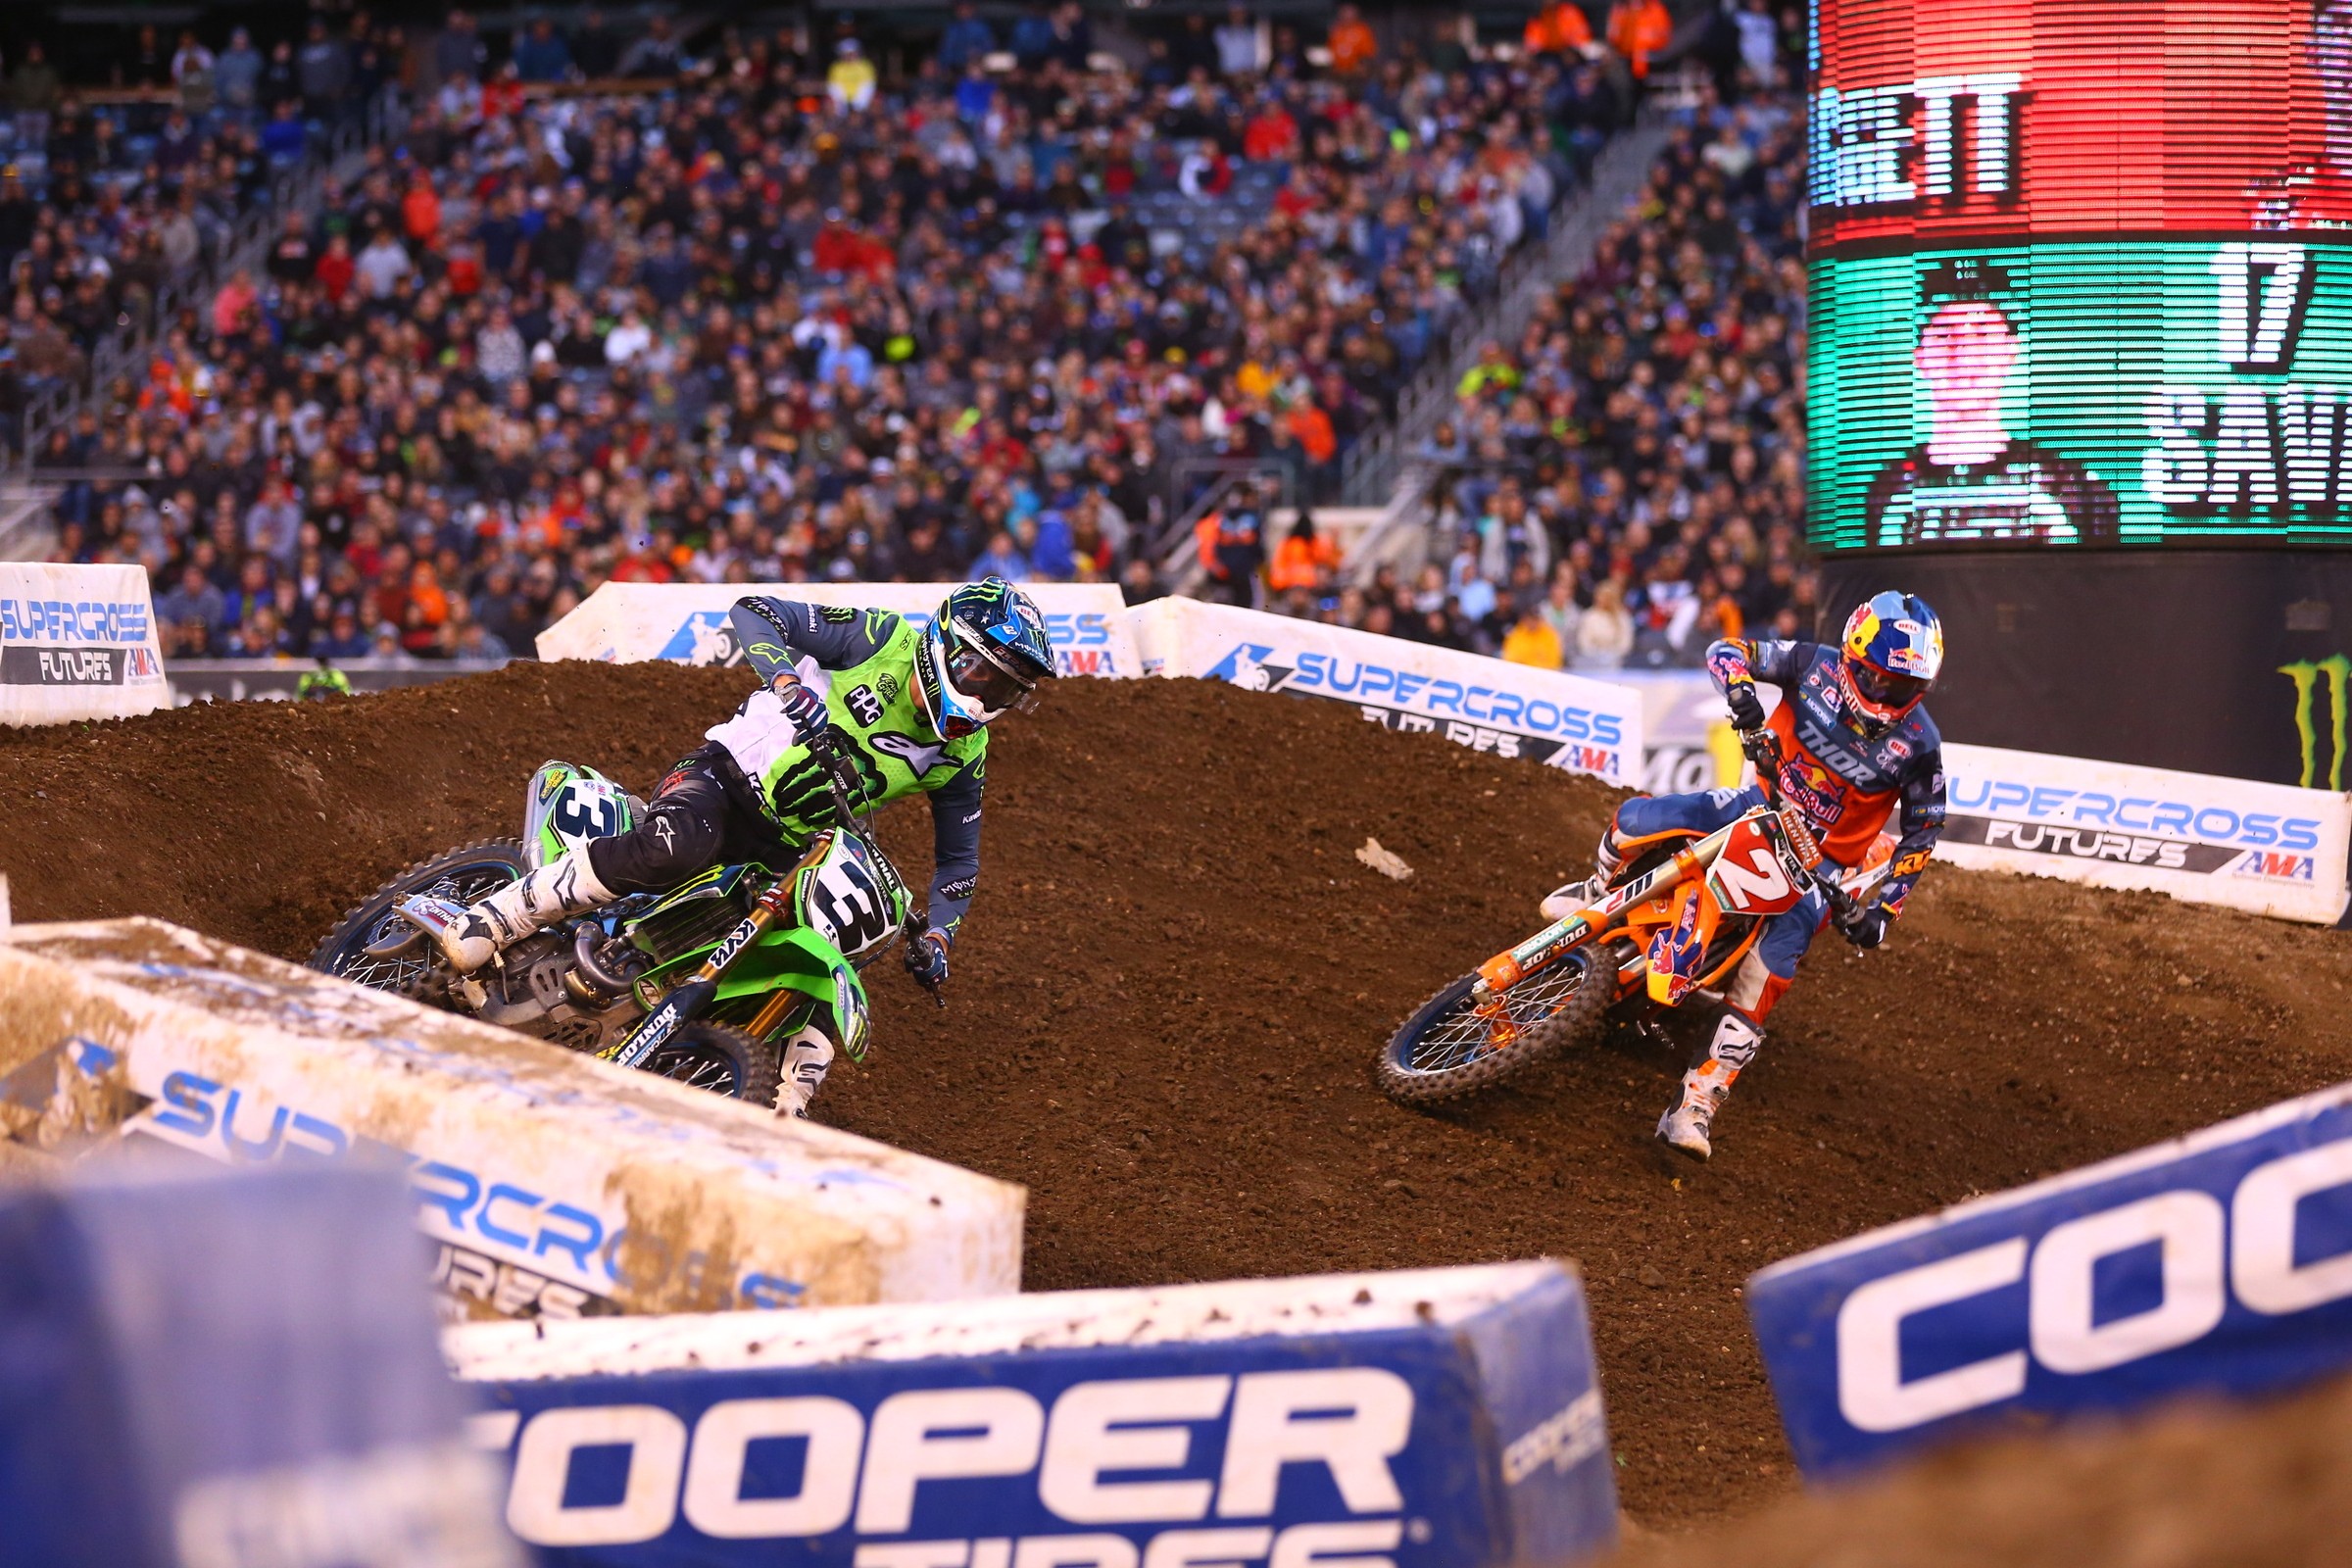 Live Updates From 2019 East Rutherford Supercross